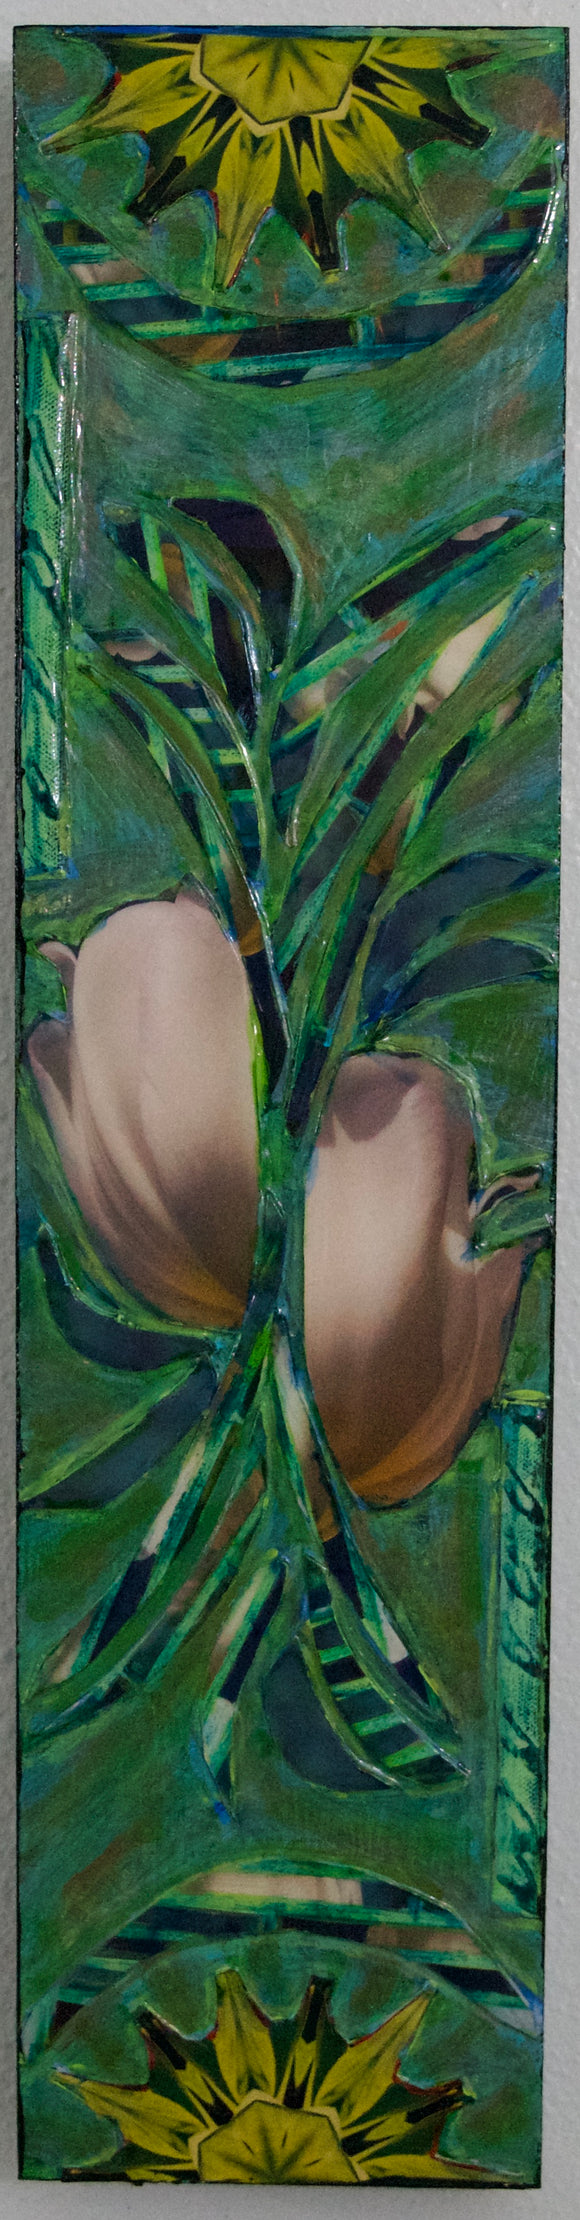 Re-Pieced White Tulip Abstract on Birch Board, 6x24x1.5